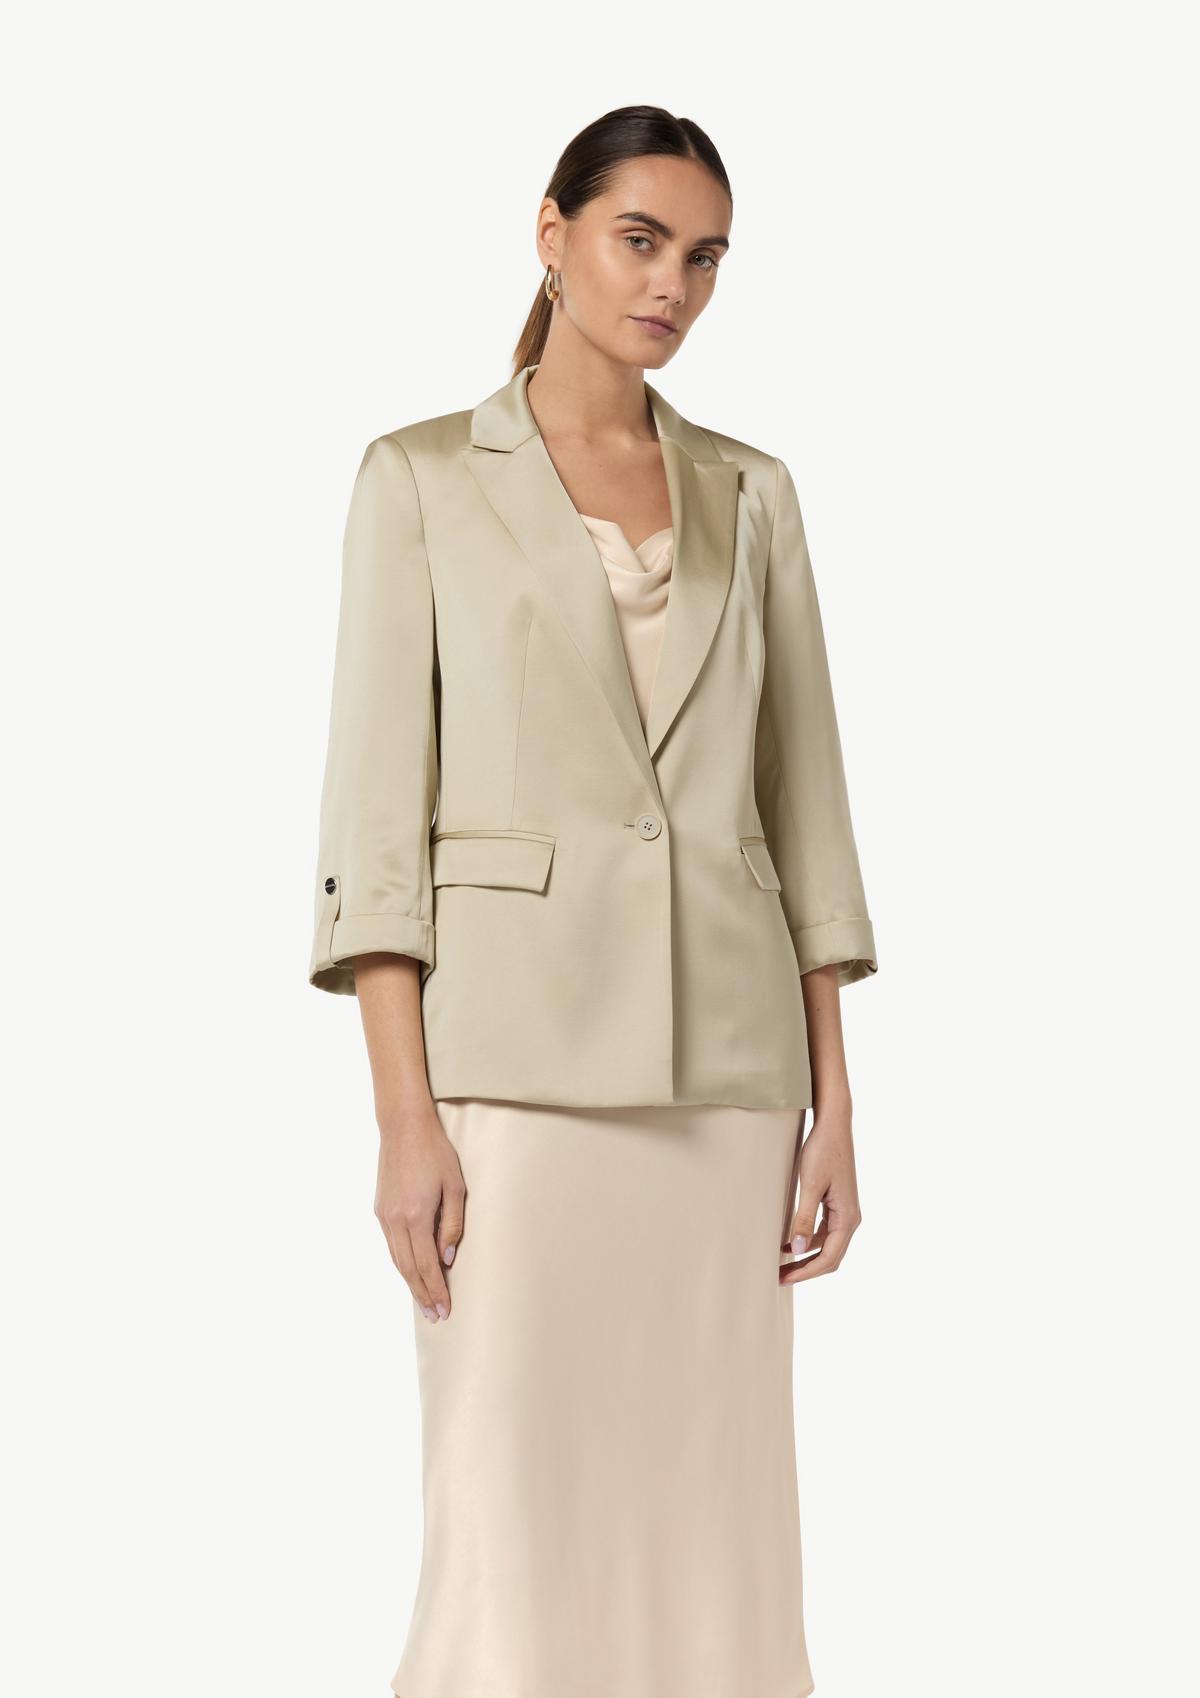 Blazer with a satin finish and 3/4-length sleeves